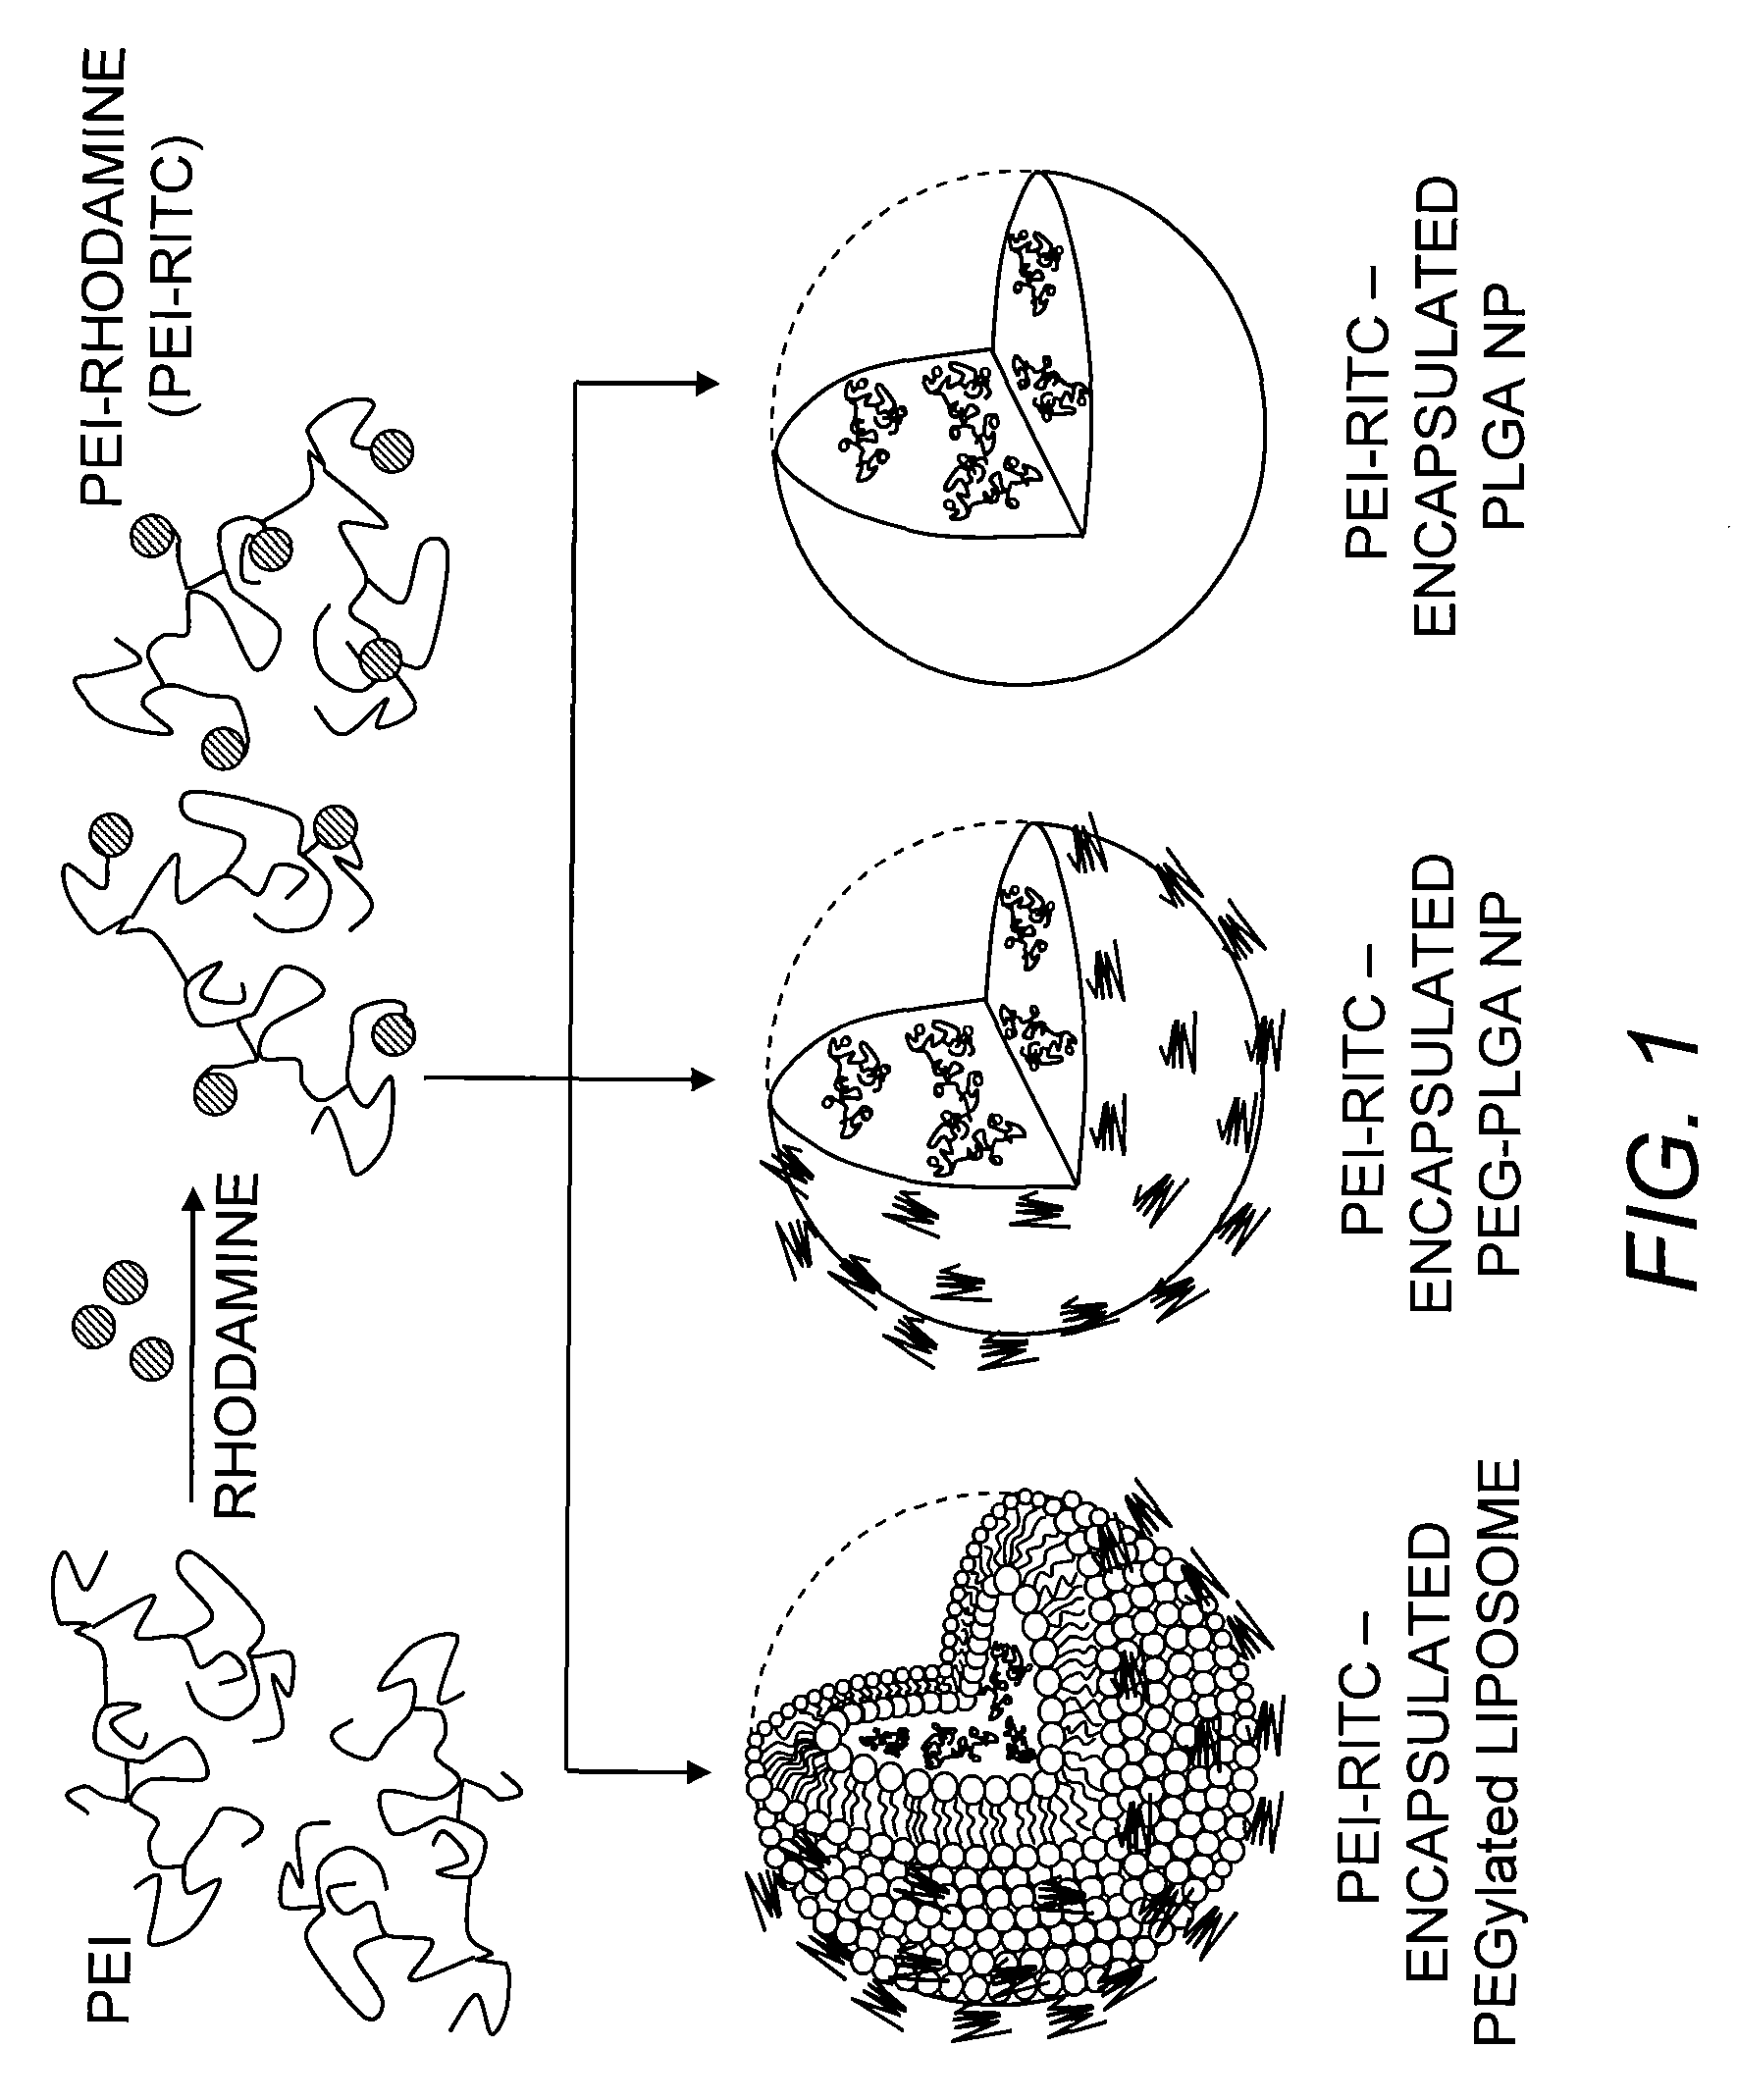 Nano-hybrid delivery system for sequential utilization of passive and active targeting